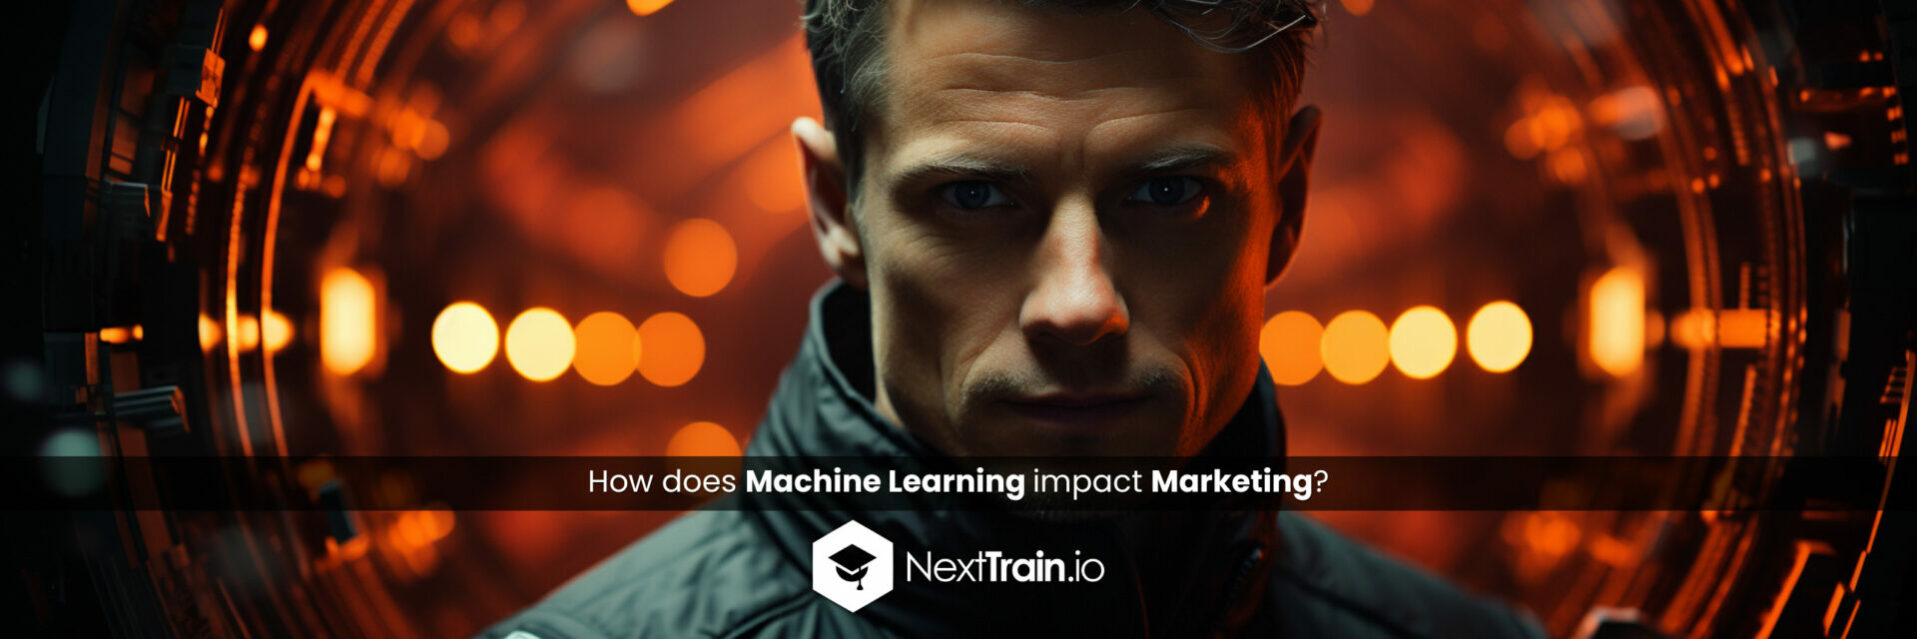 How does Machine Learning impact Marketing?